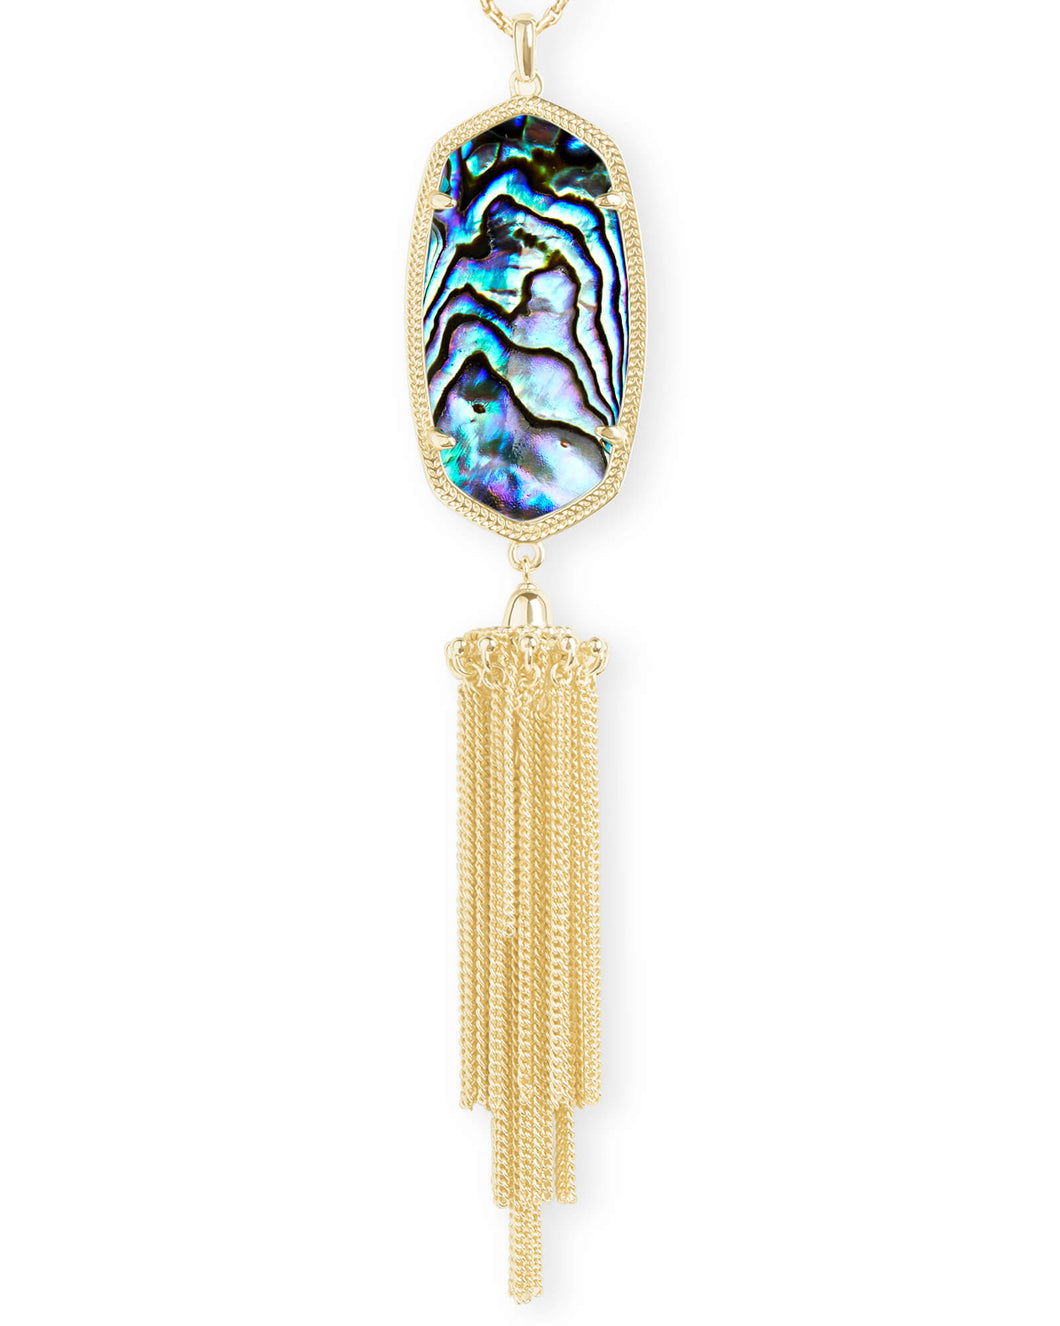 Rayne Gold Long Pendant Necklace In Abalone Shell